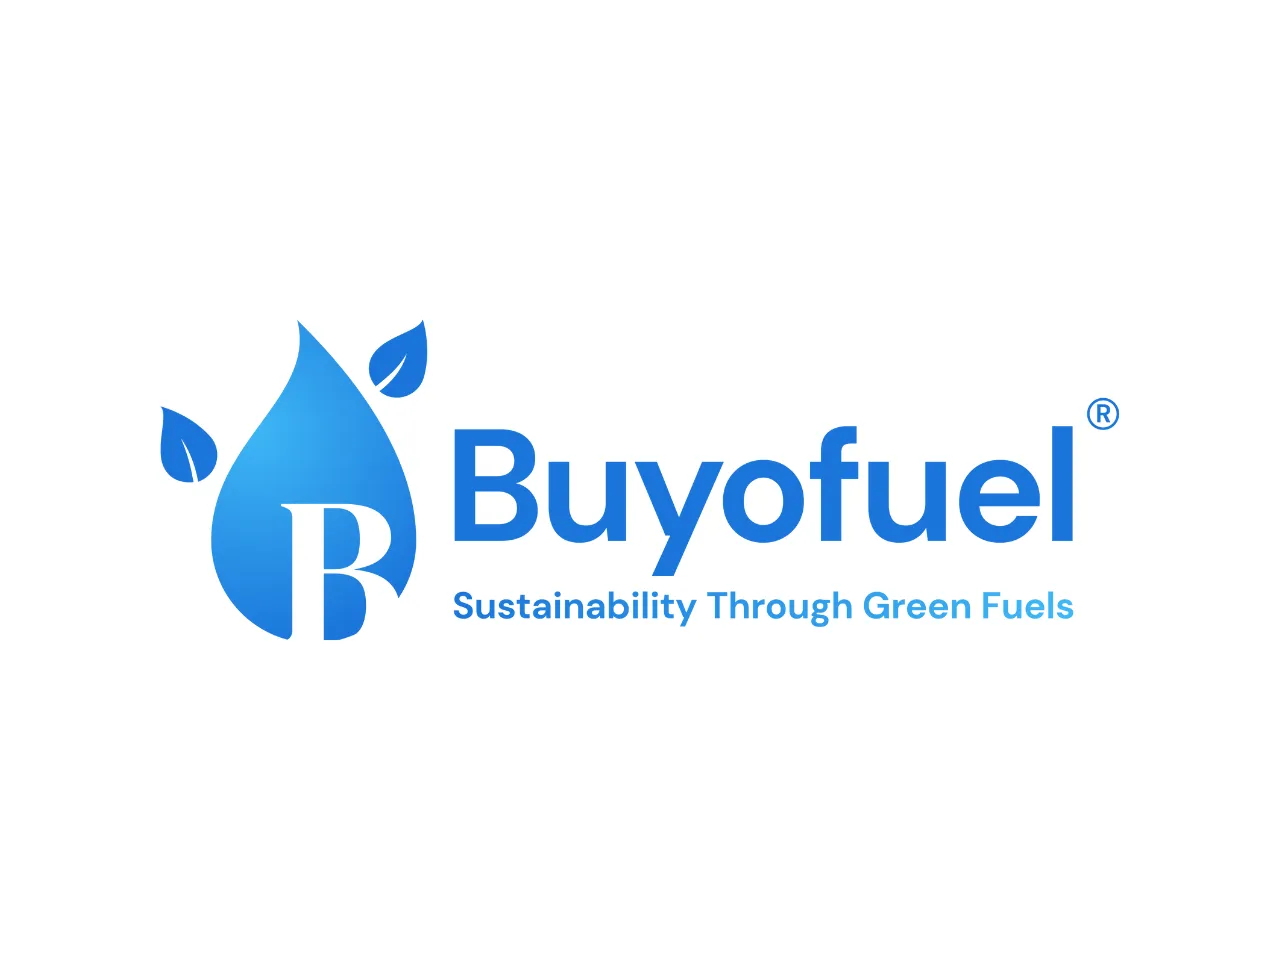 Biofuel marketplace Buyofuel raises $550K from Recur Club